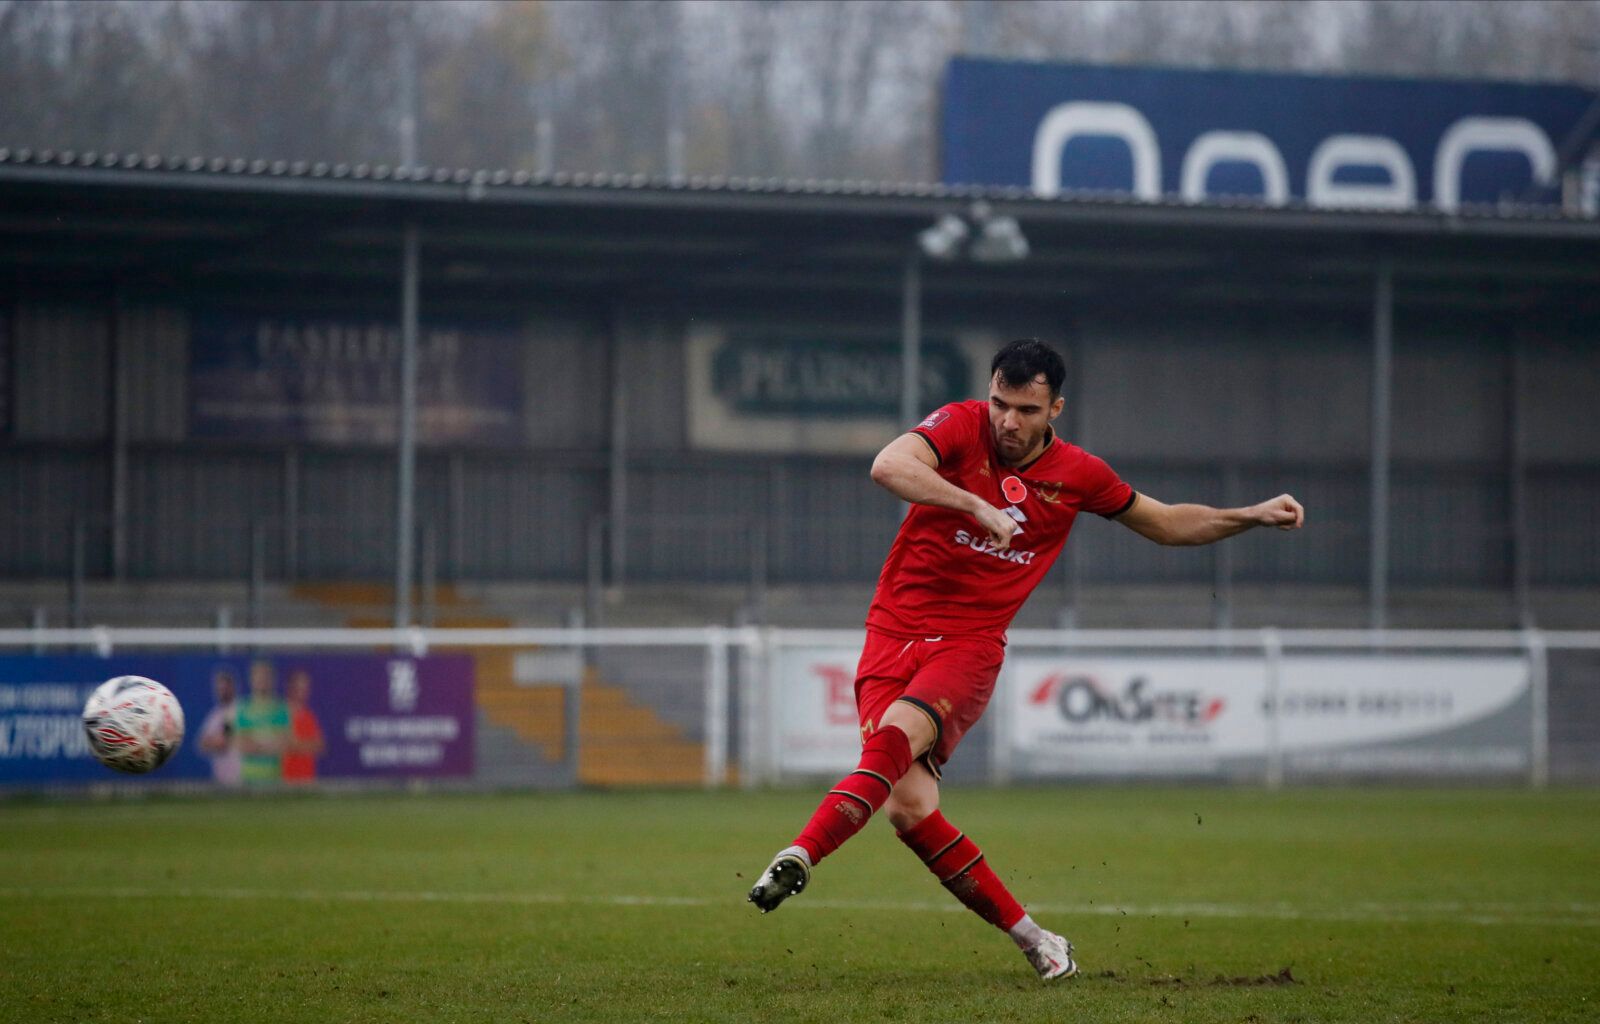 Soccer Football - FA Cup First Round - Eastleigh v Milton Keynes Dons - Silverlake Stadium, Eastleigh, Britain - November 8, 2020 Milton Keynes Dons' Scott Fraser scores the winning penalty during the shootout Action Images/Andrew Couldridge